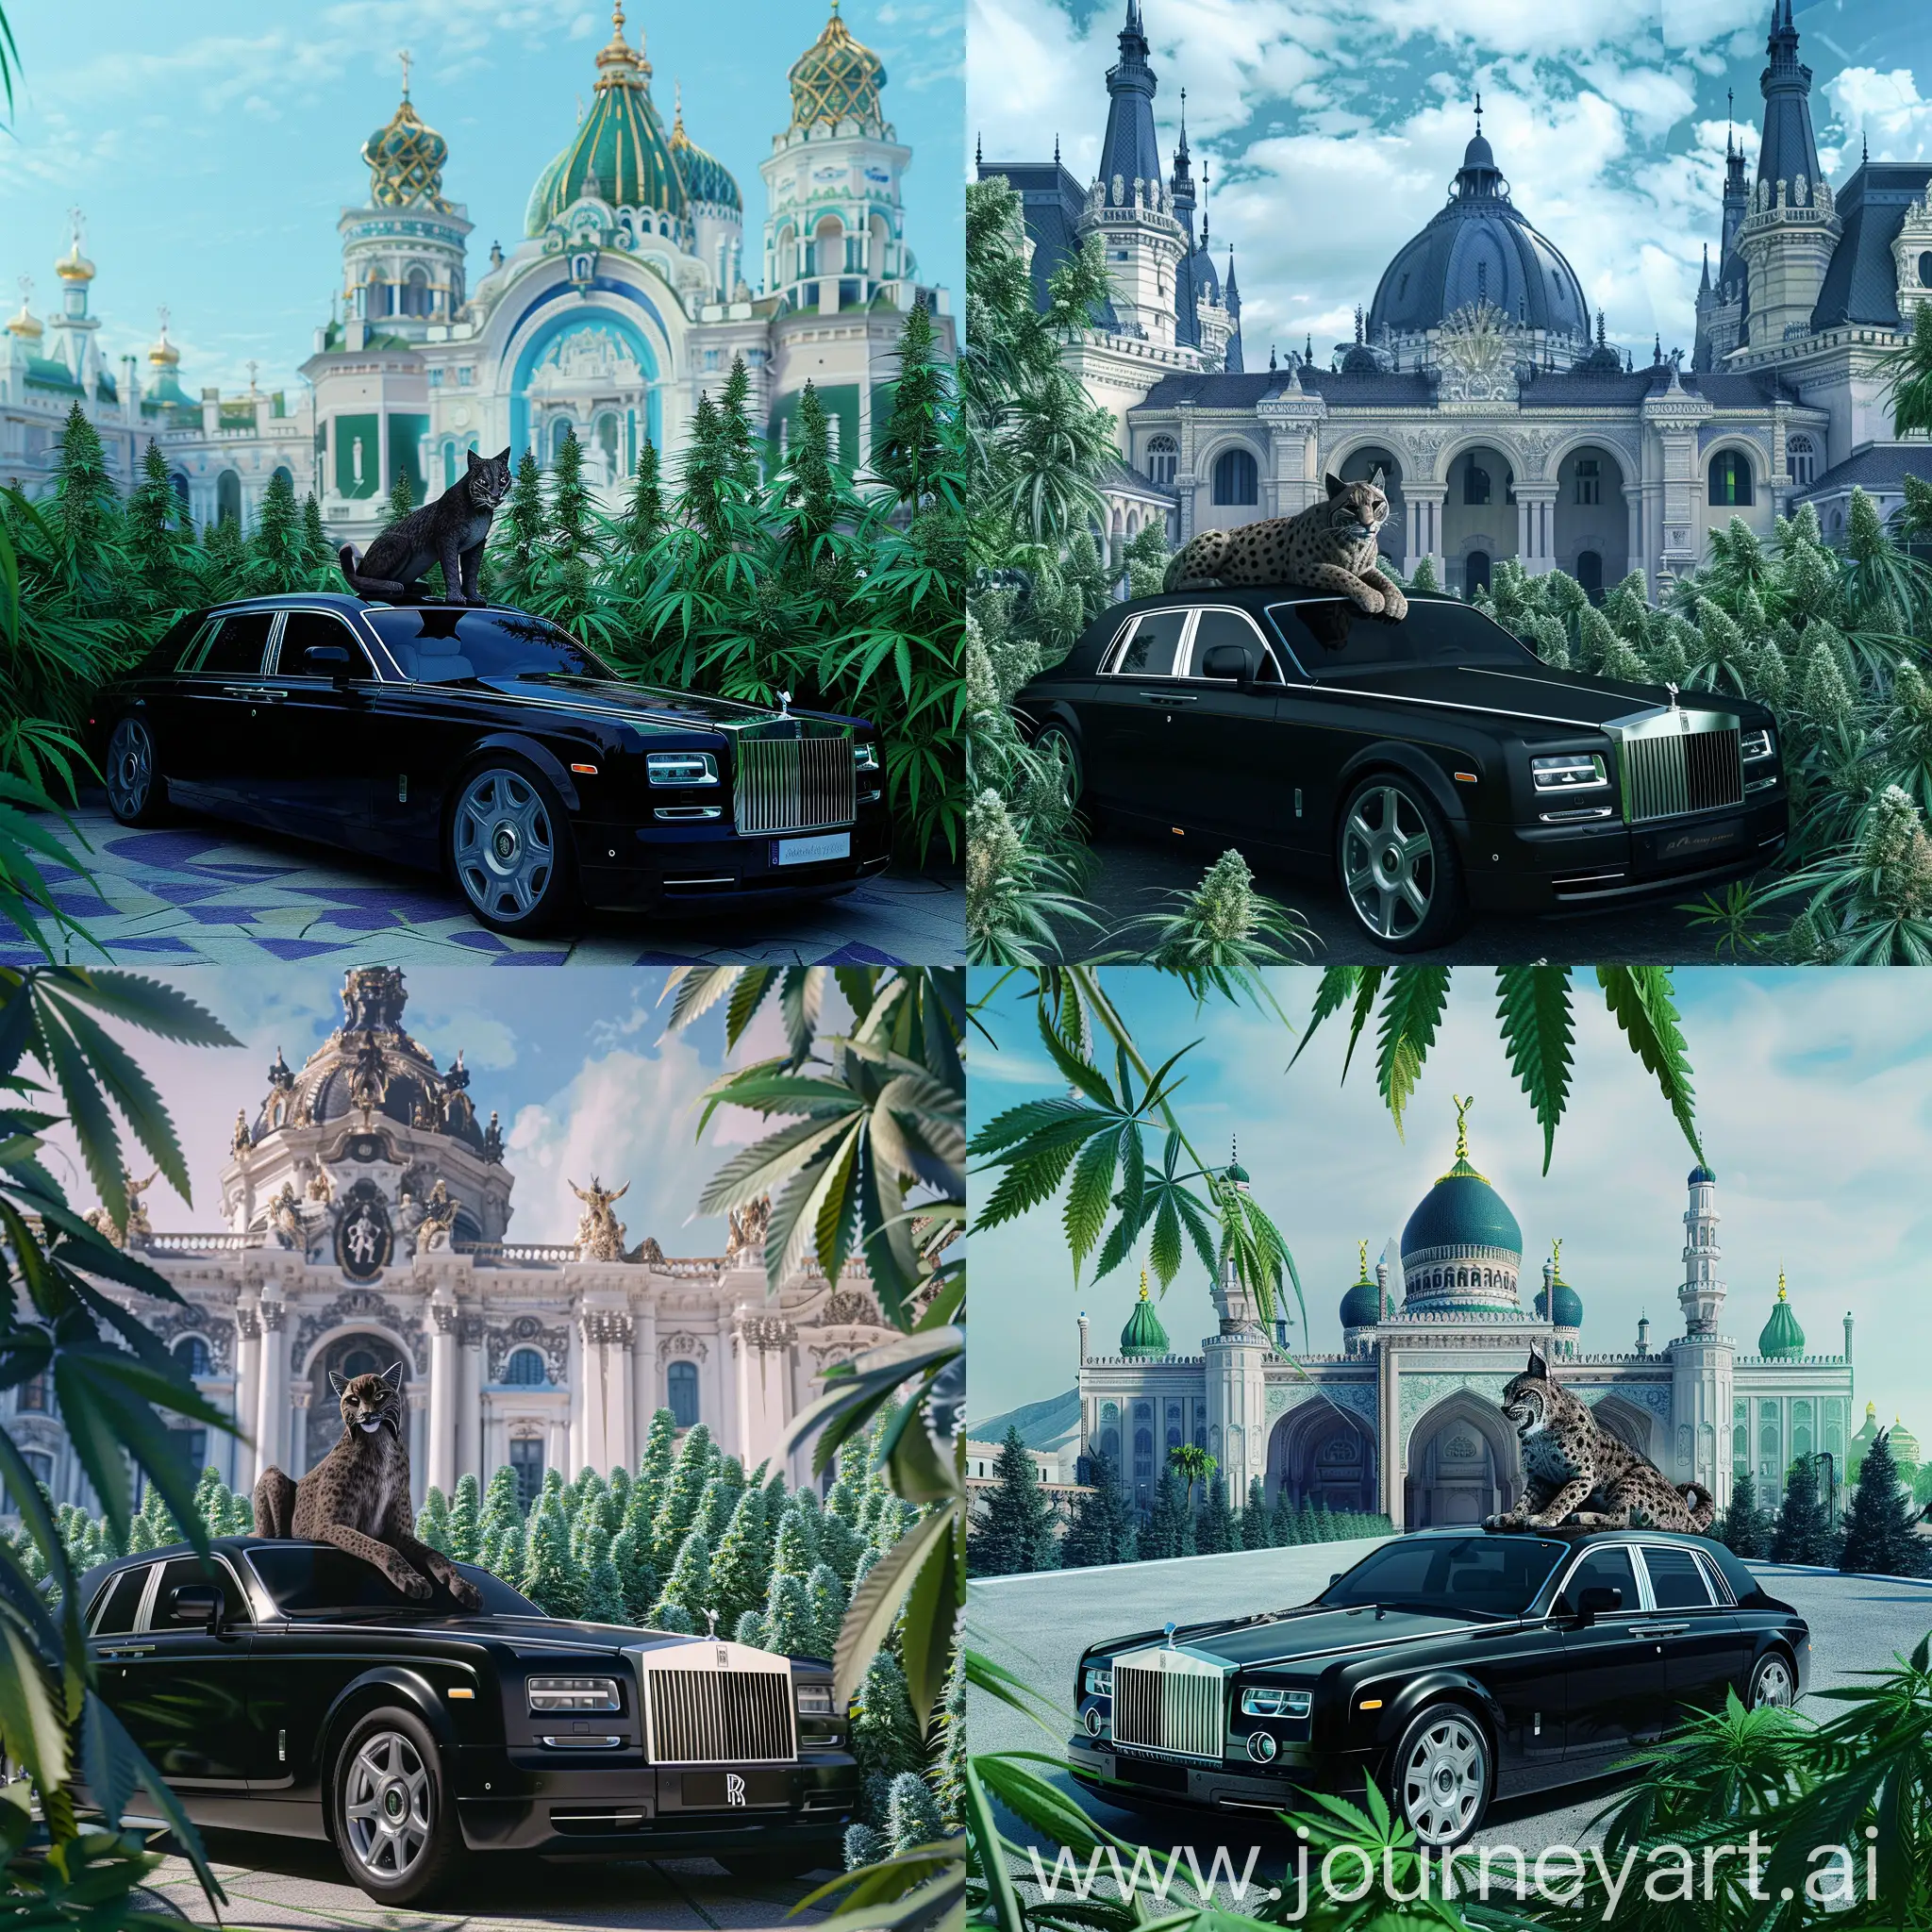 Luxury-Car-with-Lynx-at-Palace-with-Cannabis-Plants